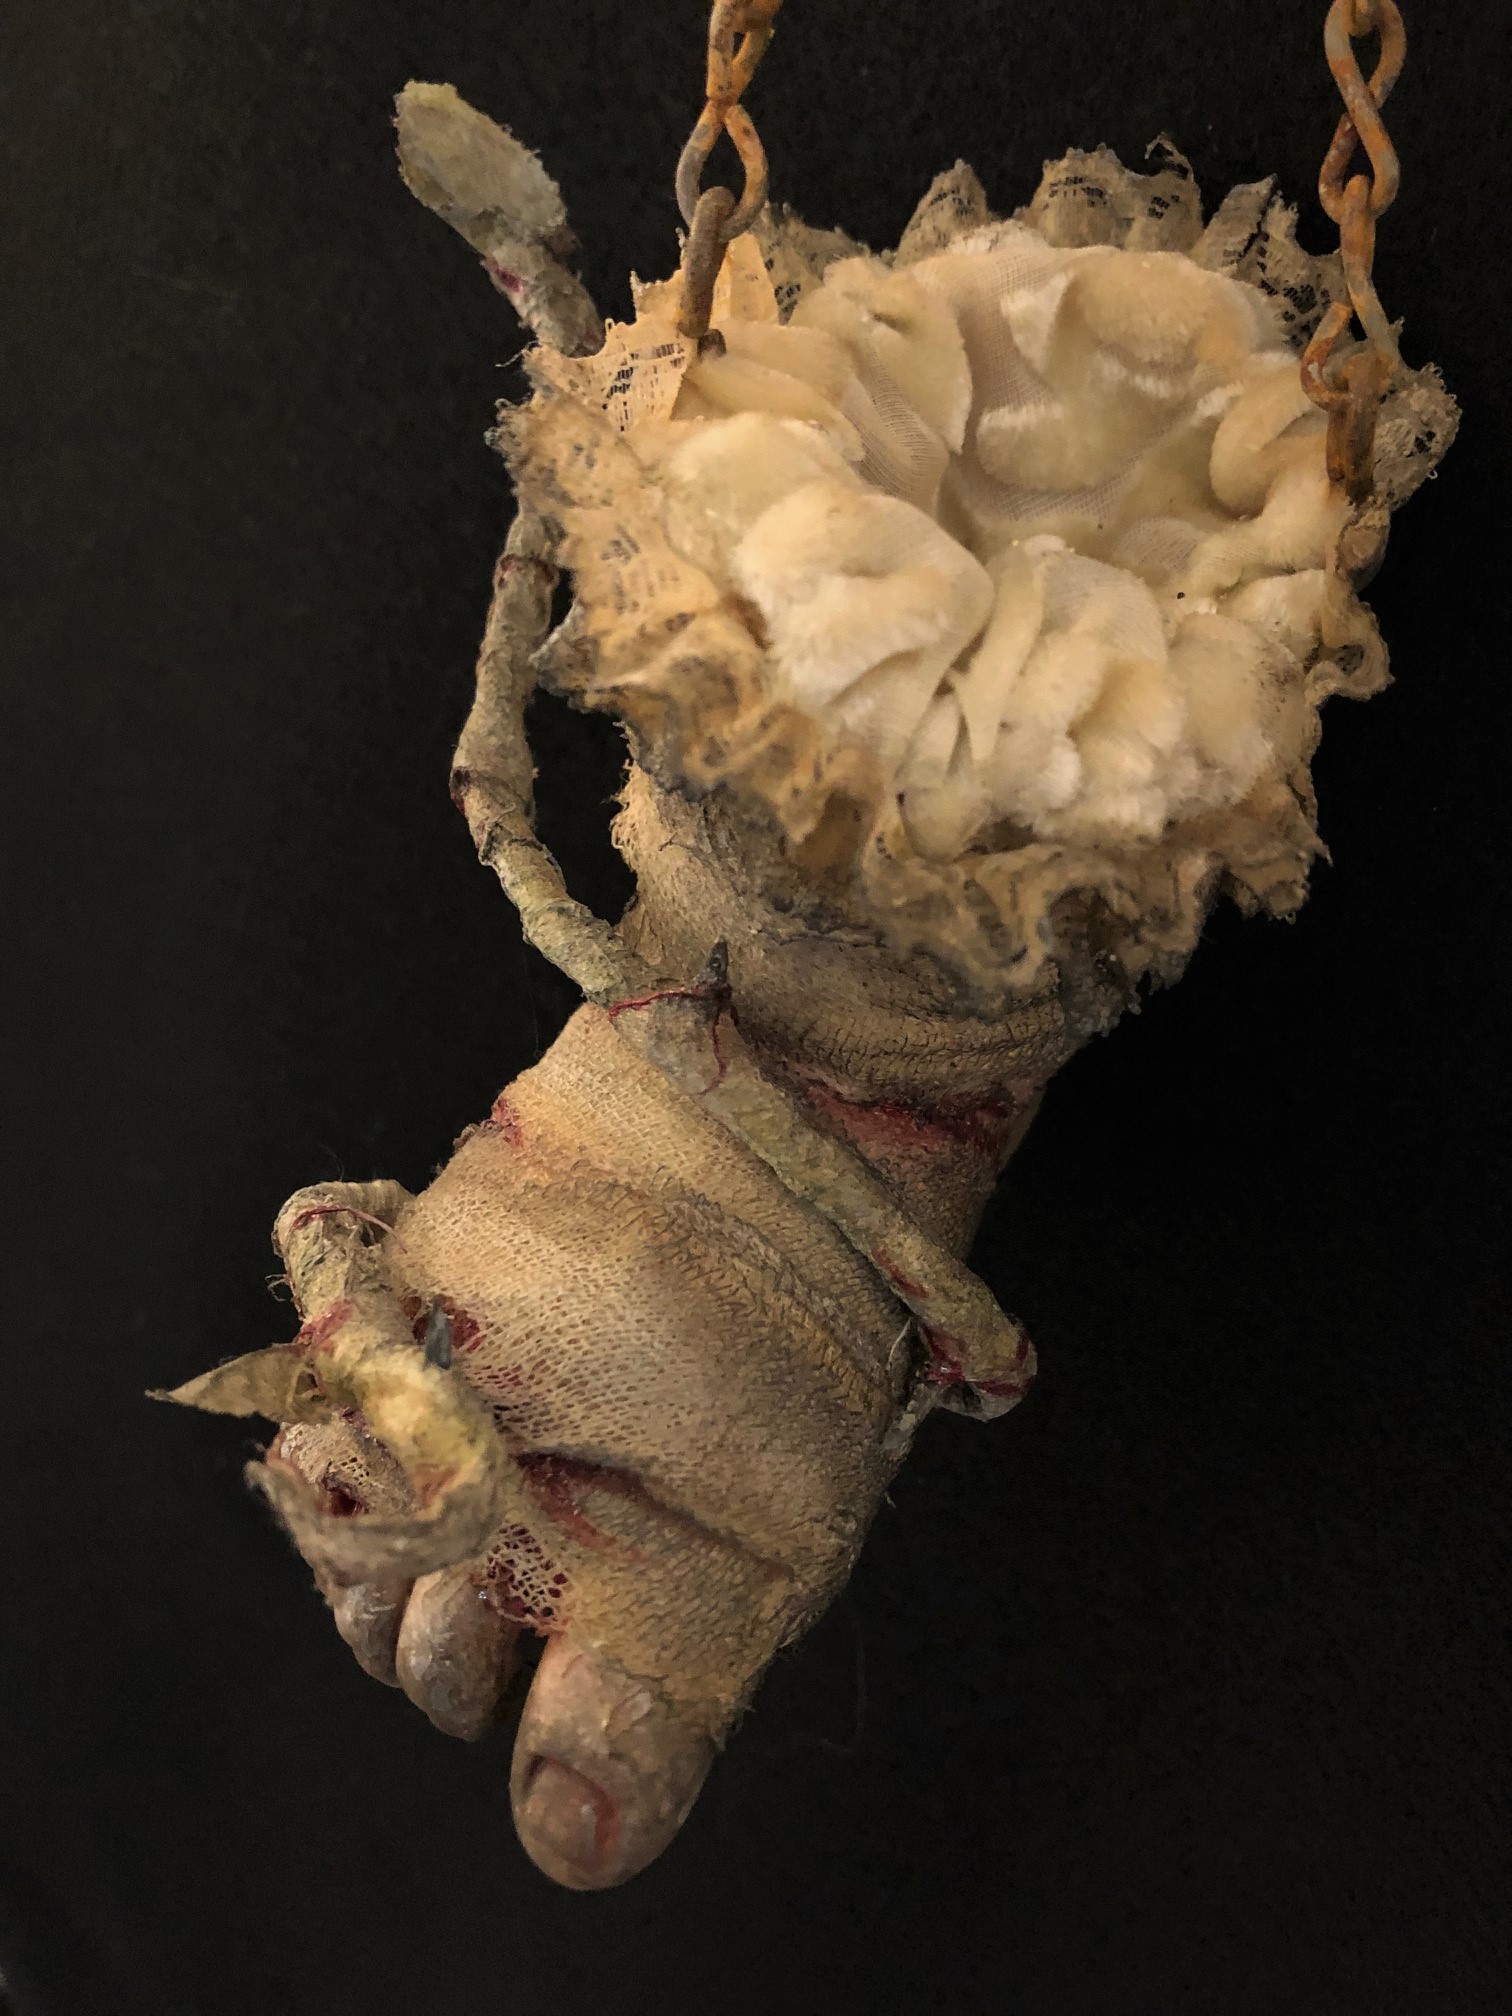 close up of art piece severed baby doll foot bandage wrapped bloody